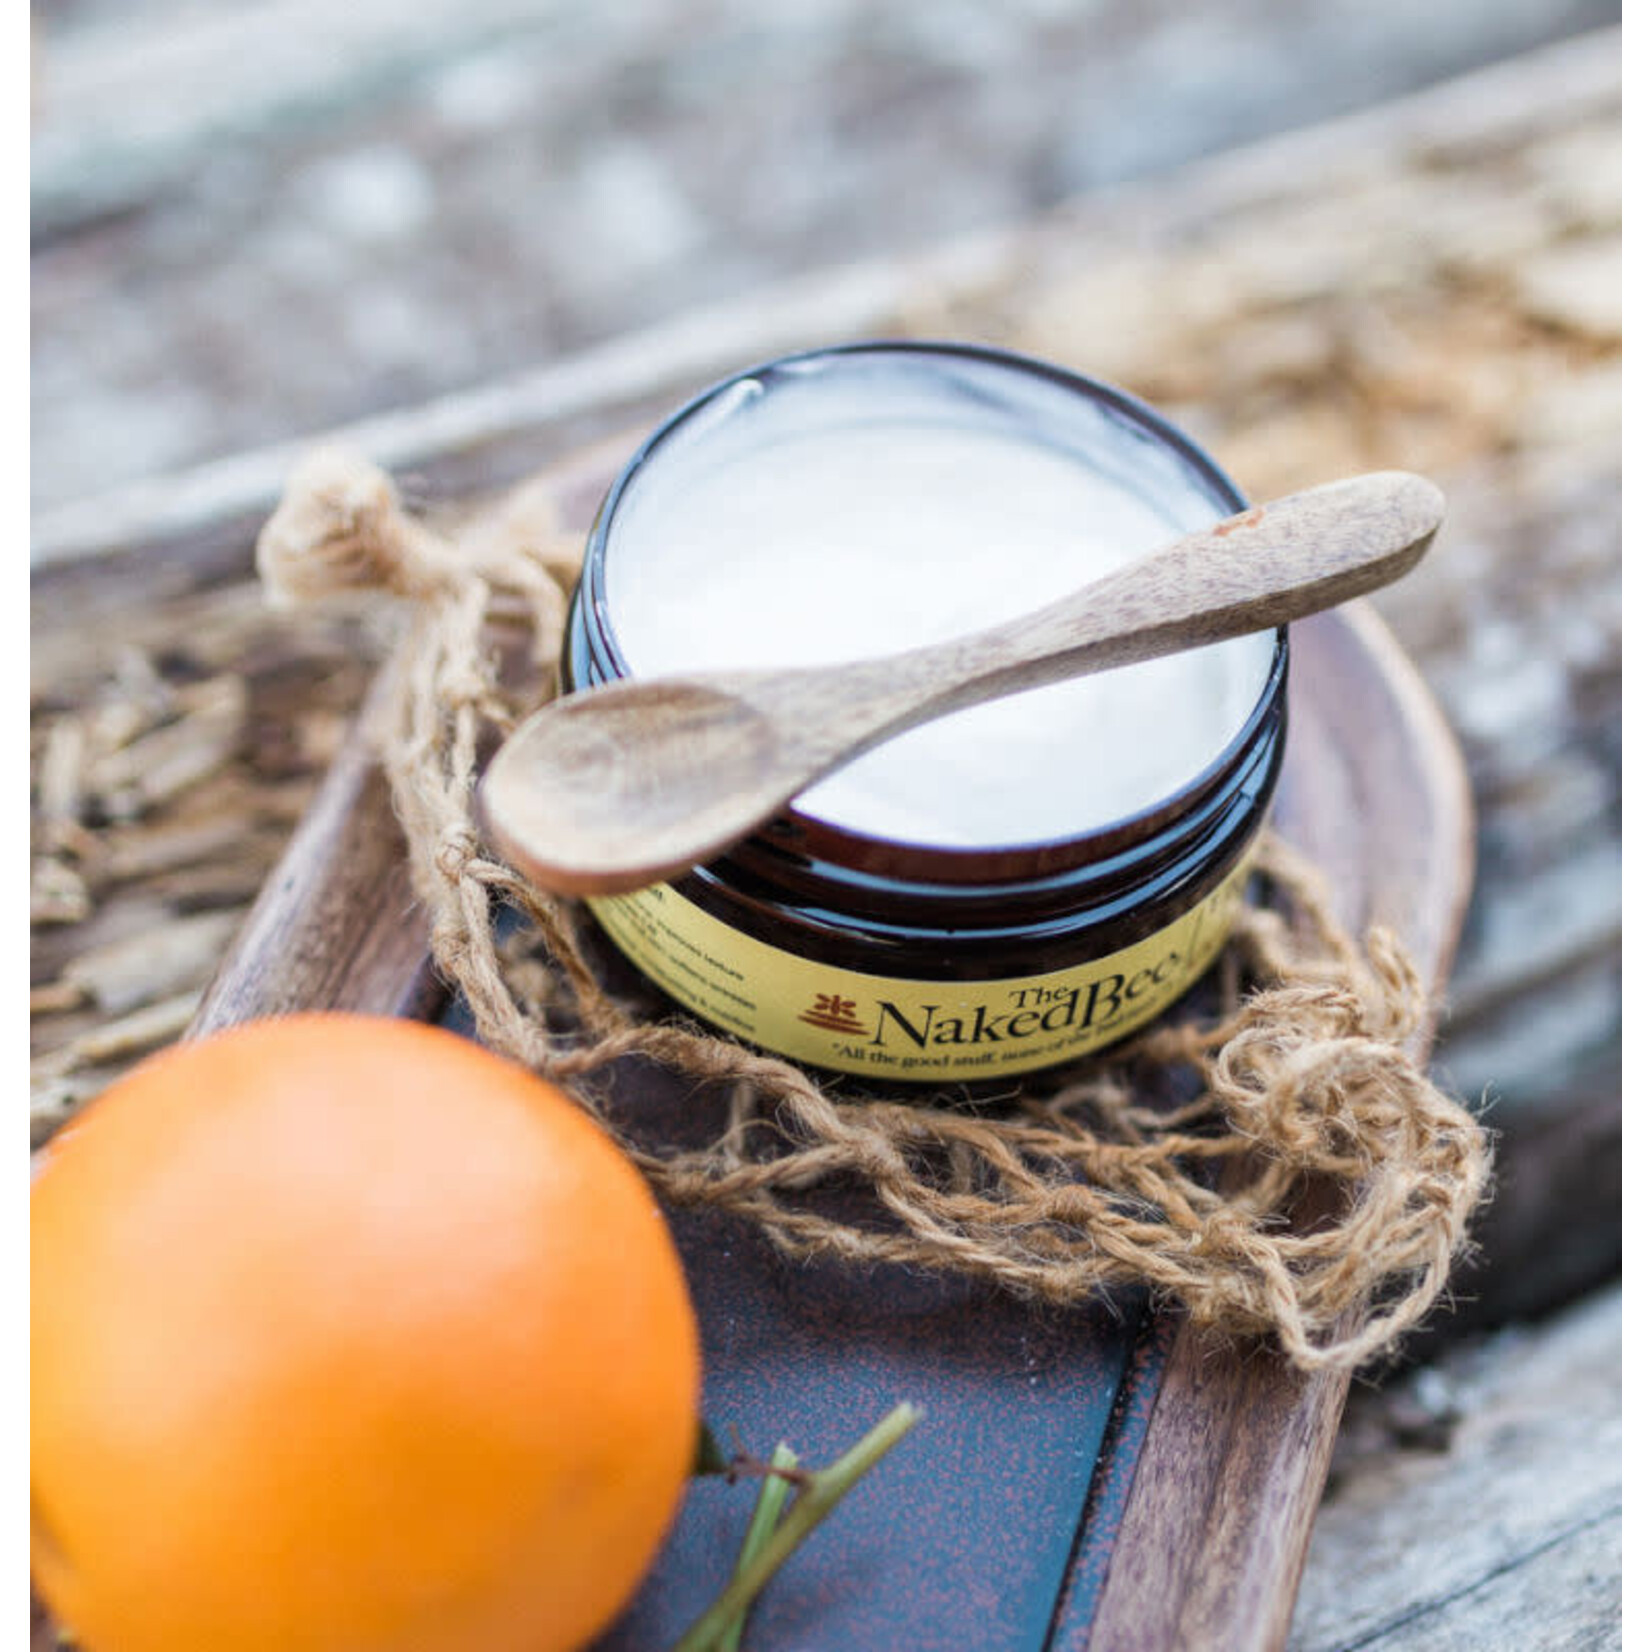 The Naked Bee Ultra Rich Body Butter